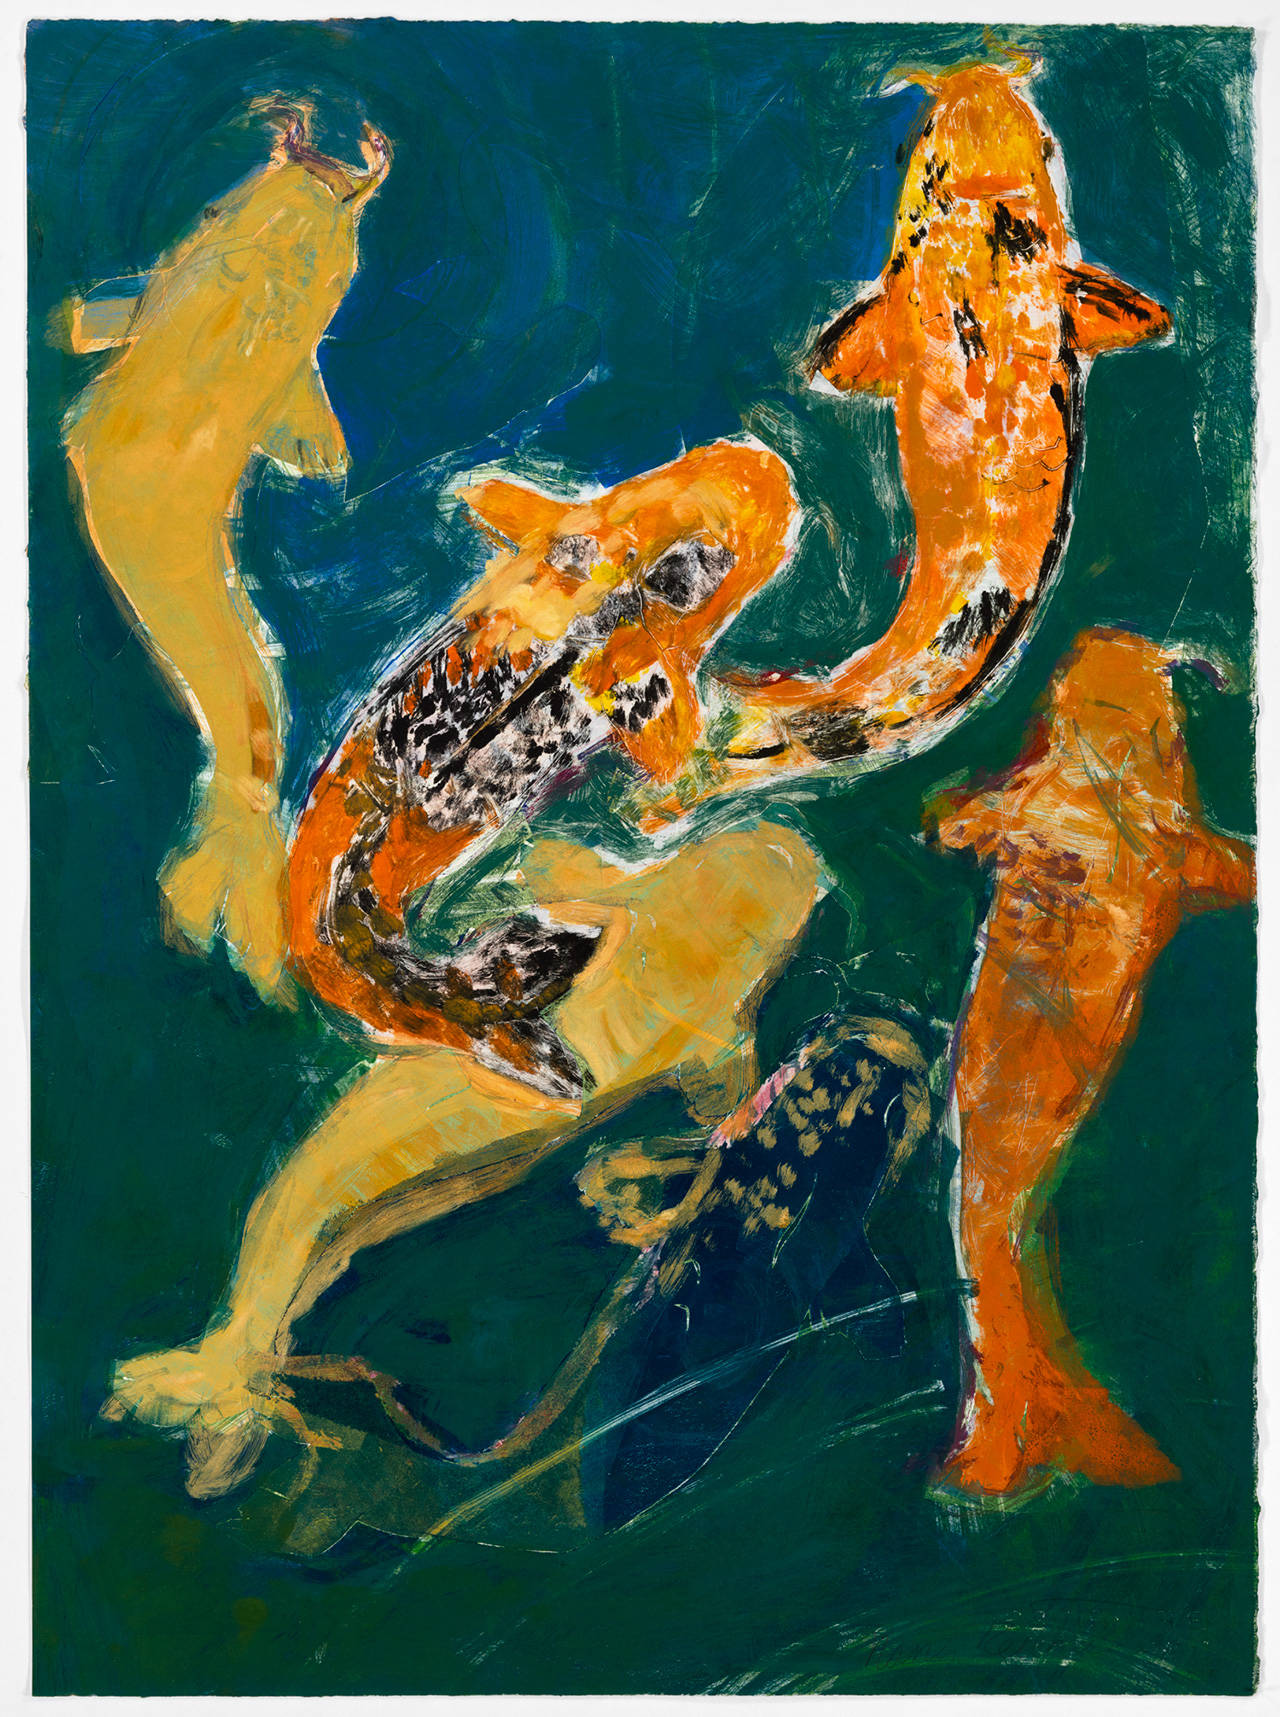 “Koi Pond No. 1 (monotype and collage) by Nancy Reithaar. (Image courtesy of Art & Soul)